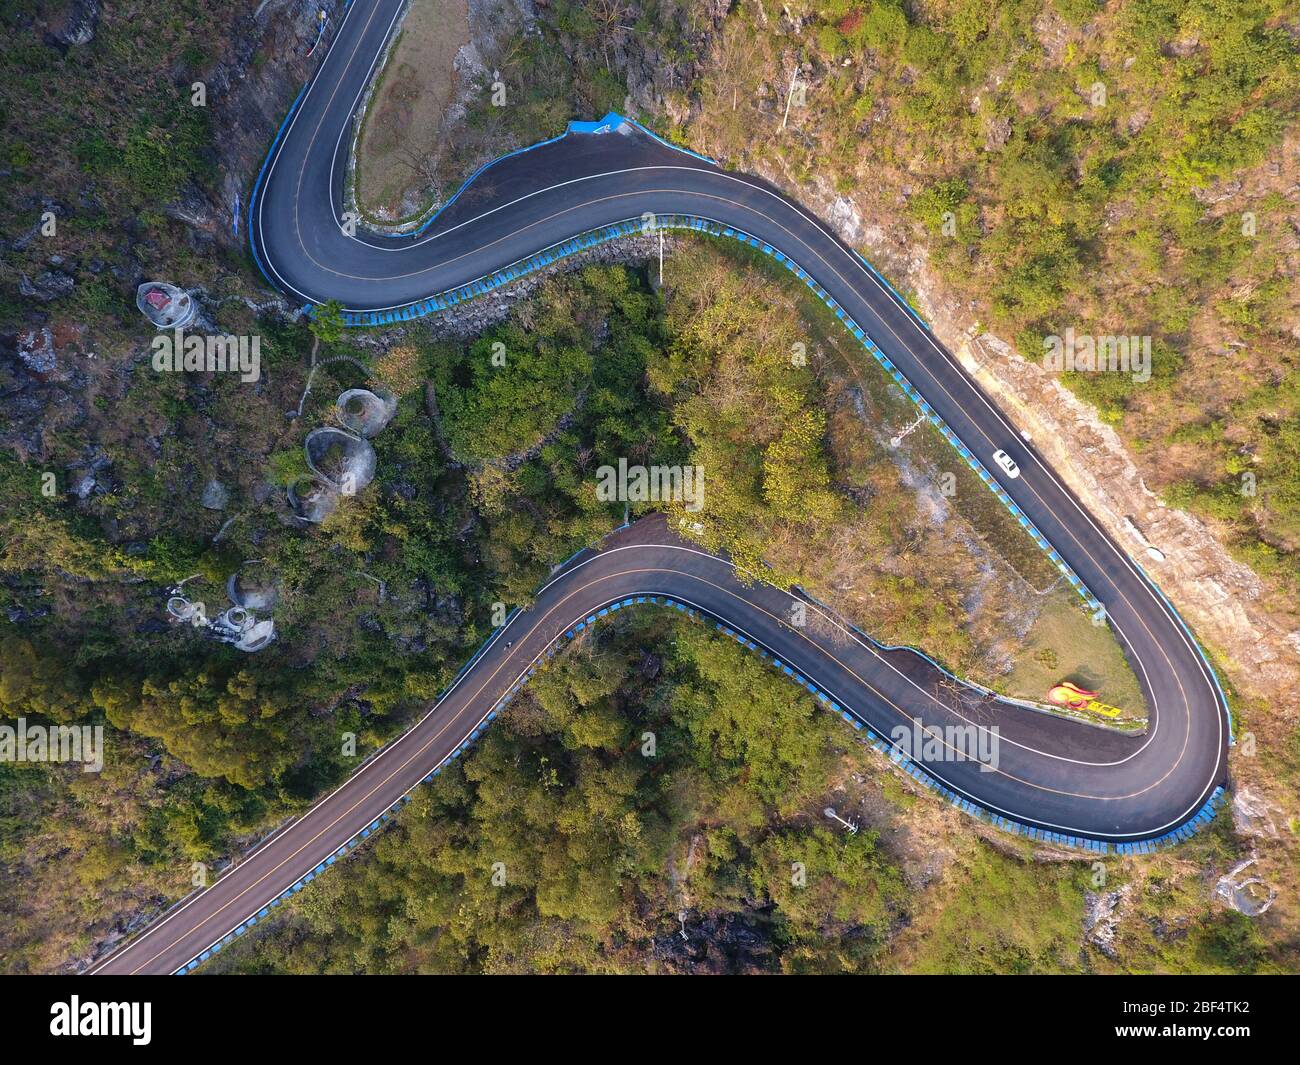 (200417) -- NANNING, April 17, 2020 (Xinhua) -- Aerial photo taken on March 8, 2018 shows a rural road in Guling Township of Mashan County, south China's Guangxi Zhuang Autonomous Region. Though bordering the wealthy Guangdong Province and boasting a coastline of 1,500 kilometers, Guangxi Zhuang Autonomous Region is a mountainous region and has long been plagued by poverty. Transport difficulties remained a major impediment to rural development, mainly in mountain-locked rural areas in Guangxi. Inadequate road access was common, and most of the time people had to walk. Many roads were eit Stock Photo